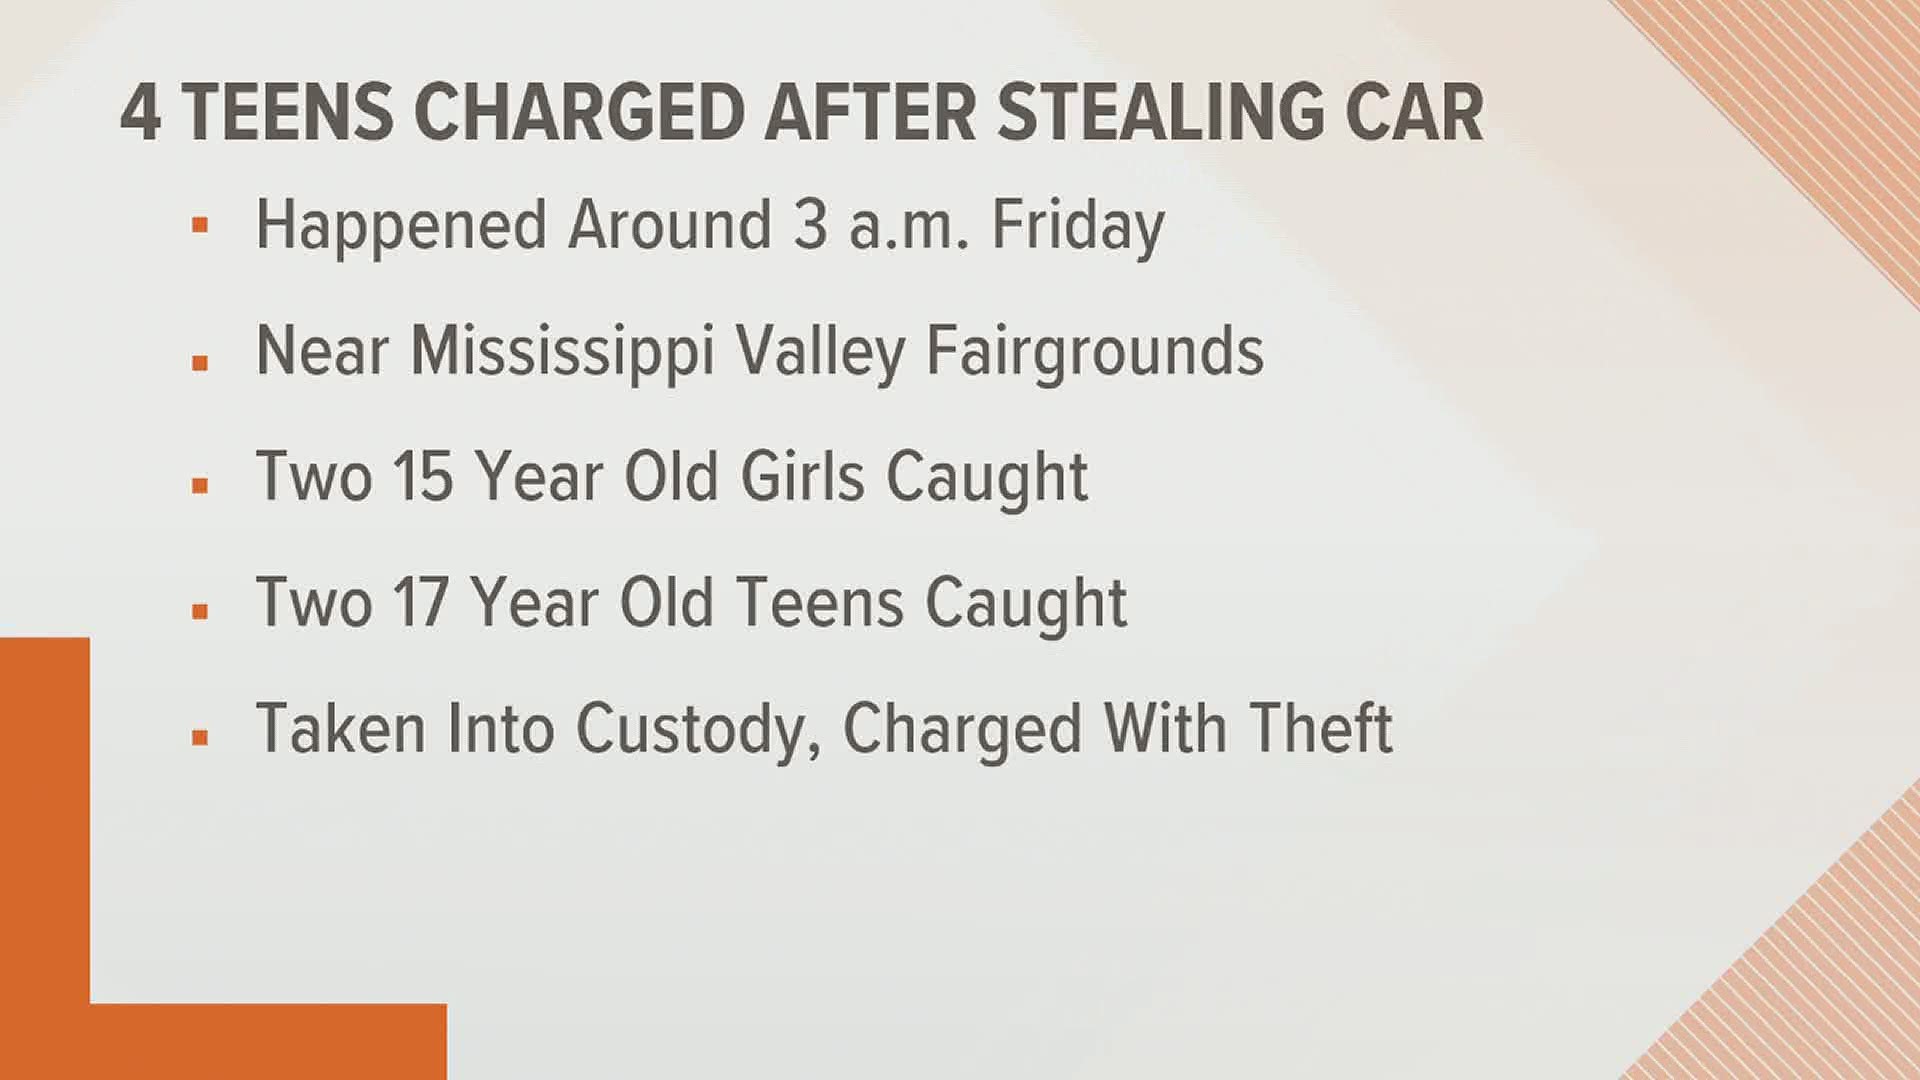 Davenport Police located a stolen car early Friday morning and arrested the four teens inside it.